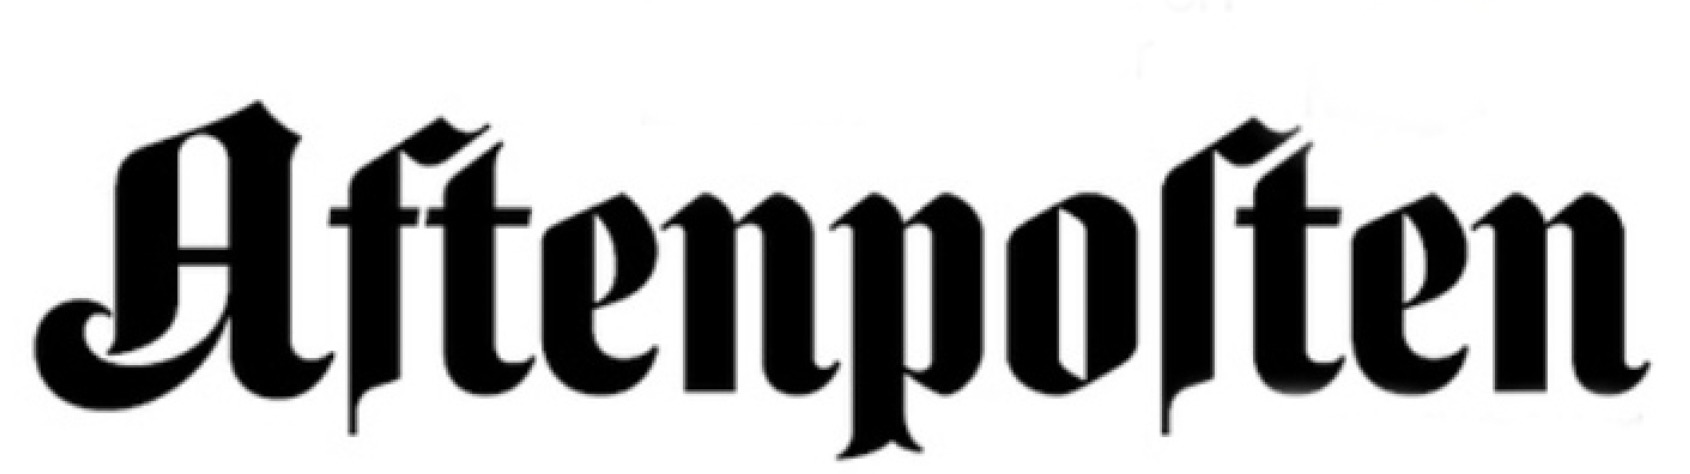 Newspaper Title Font By Abarkalo